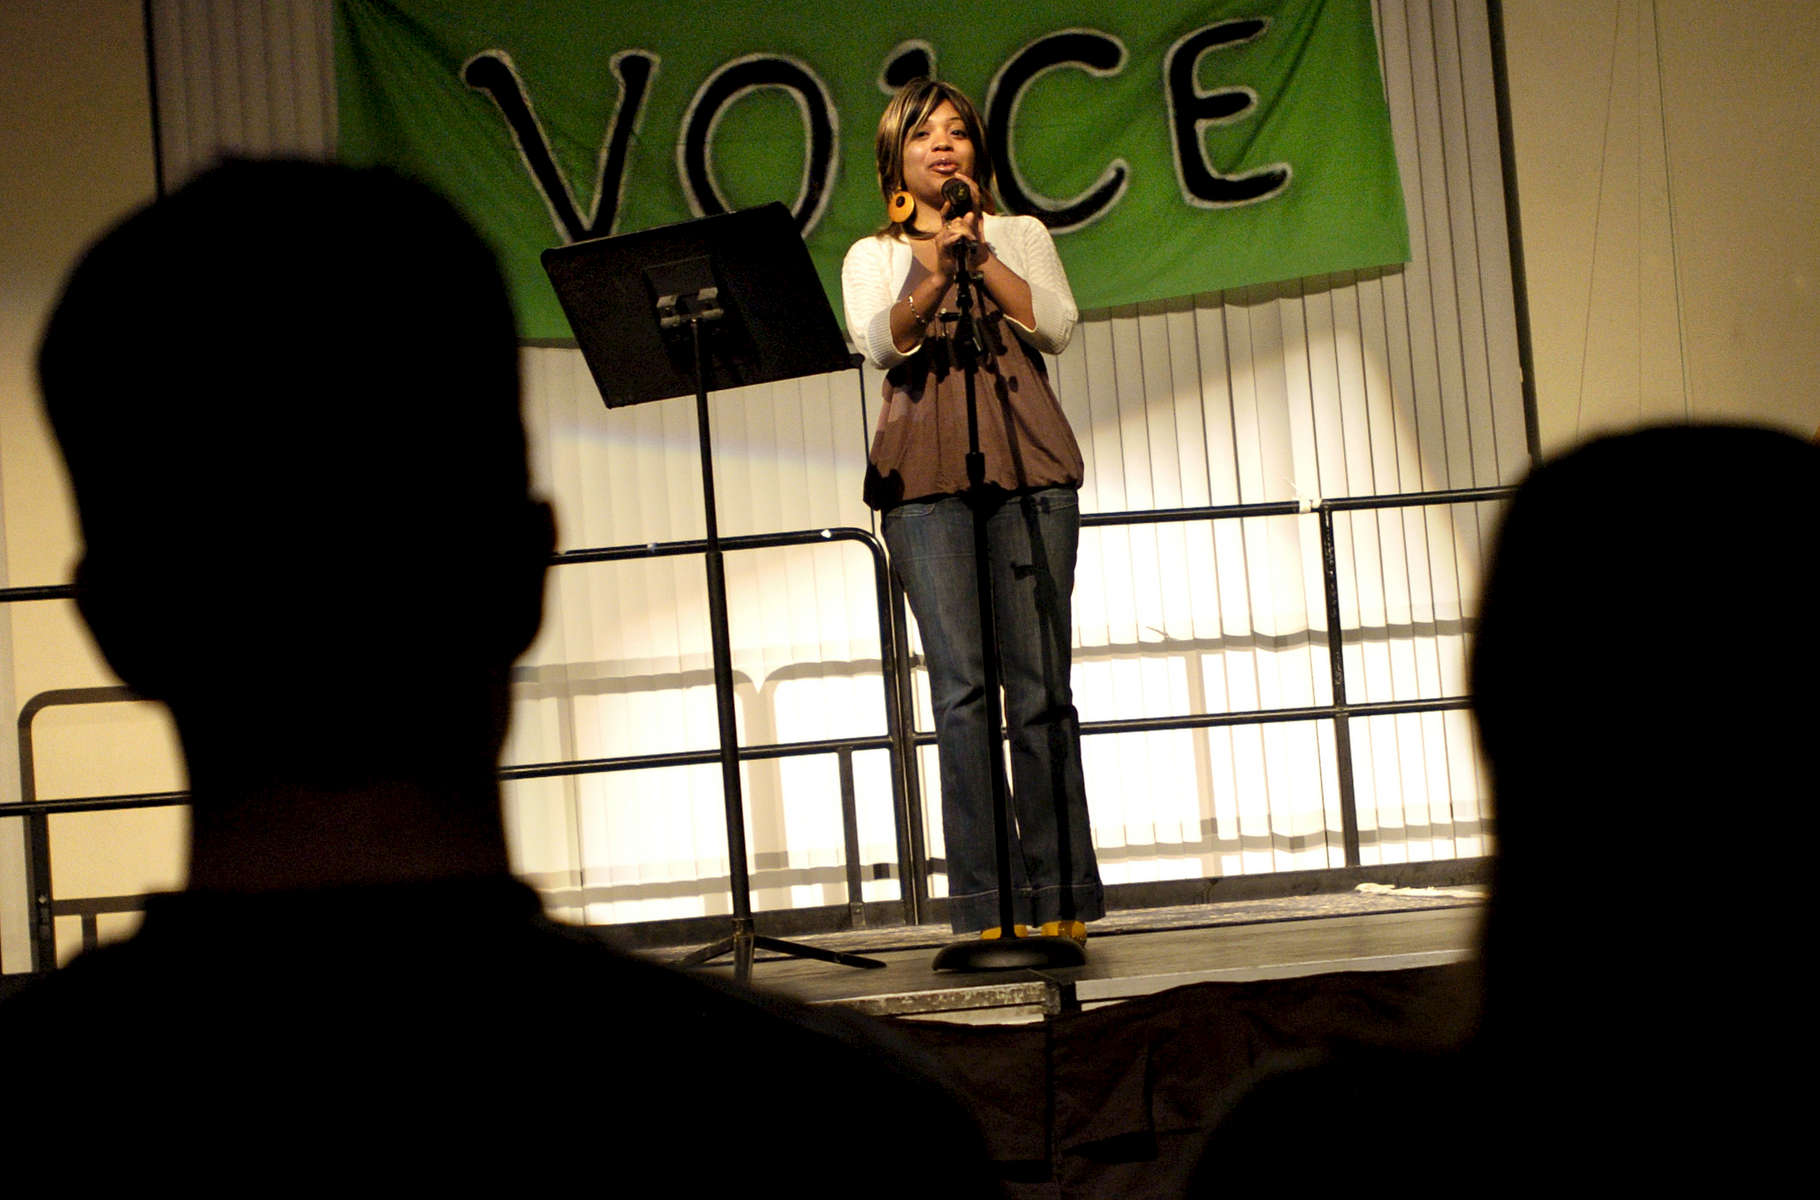 (03/16/09)(Photo by Jason McKibben) --  Atlanta poet Dana Gilmore, who was twice featured on HBO's Def Poetry Jam, performs some of her work at {quote}Voice,{quote} a women's history month poetry event about the female voice and the empowerment of women hosted by Colby College Monday night, March 16, 2009. Additional spoken word poetry was performed by Colby students and faculty. 